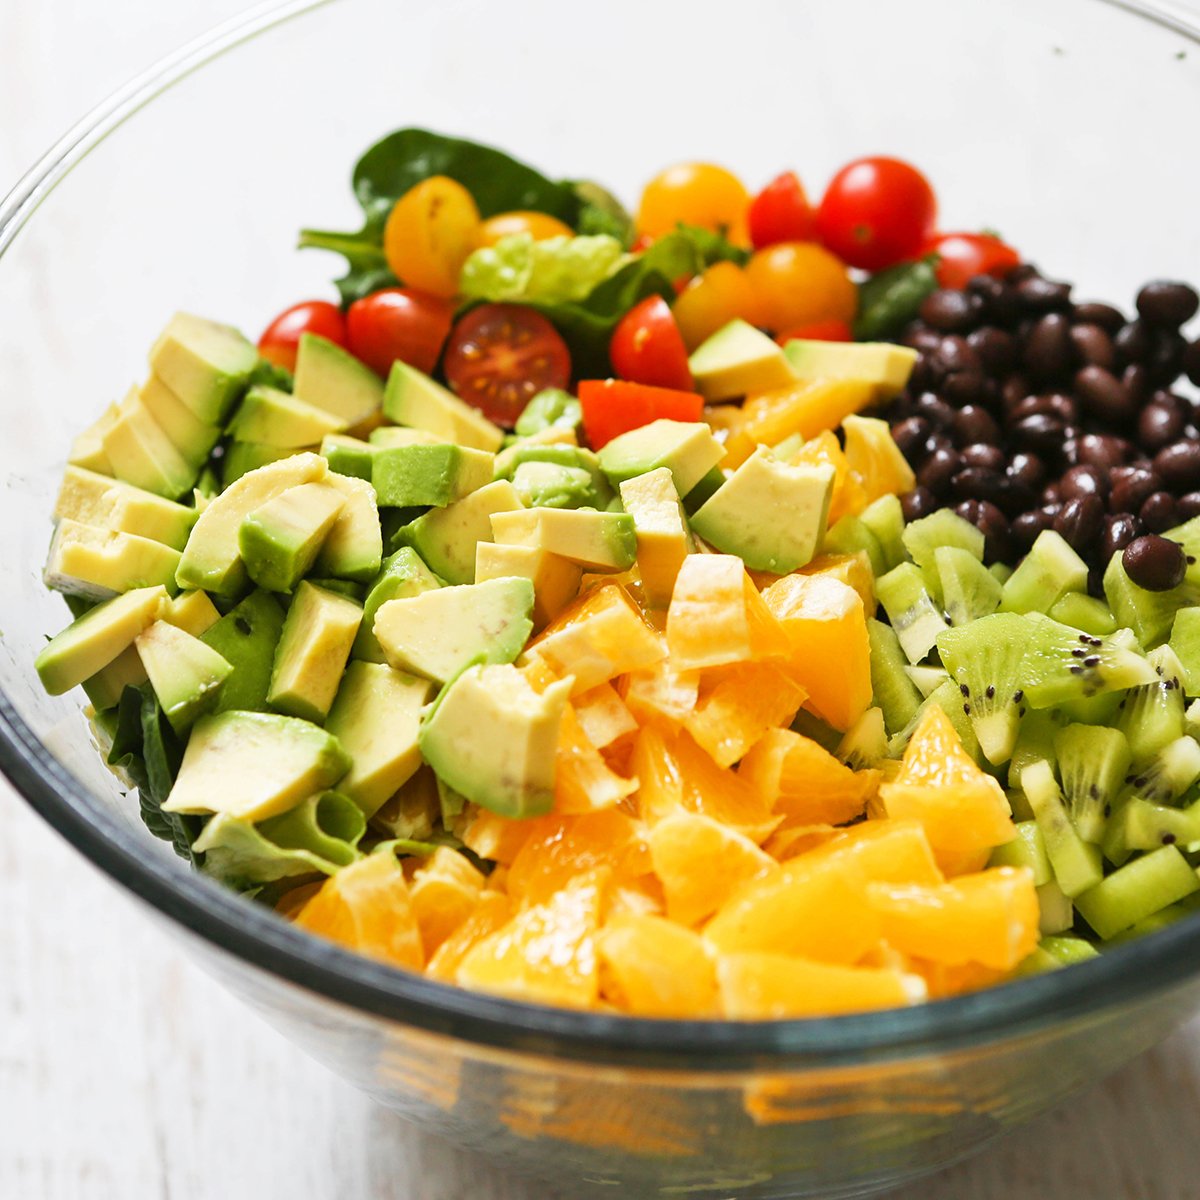 Chopped avocados, oranges, tomatoes and black beans in a bowl.